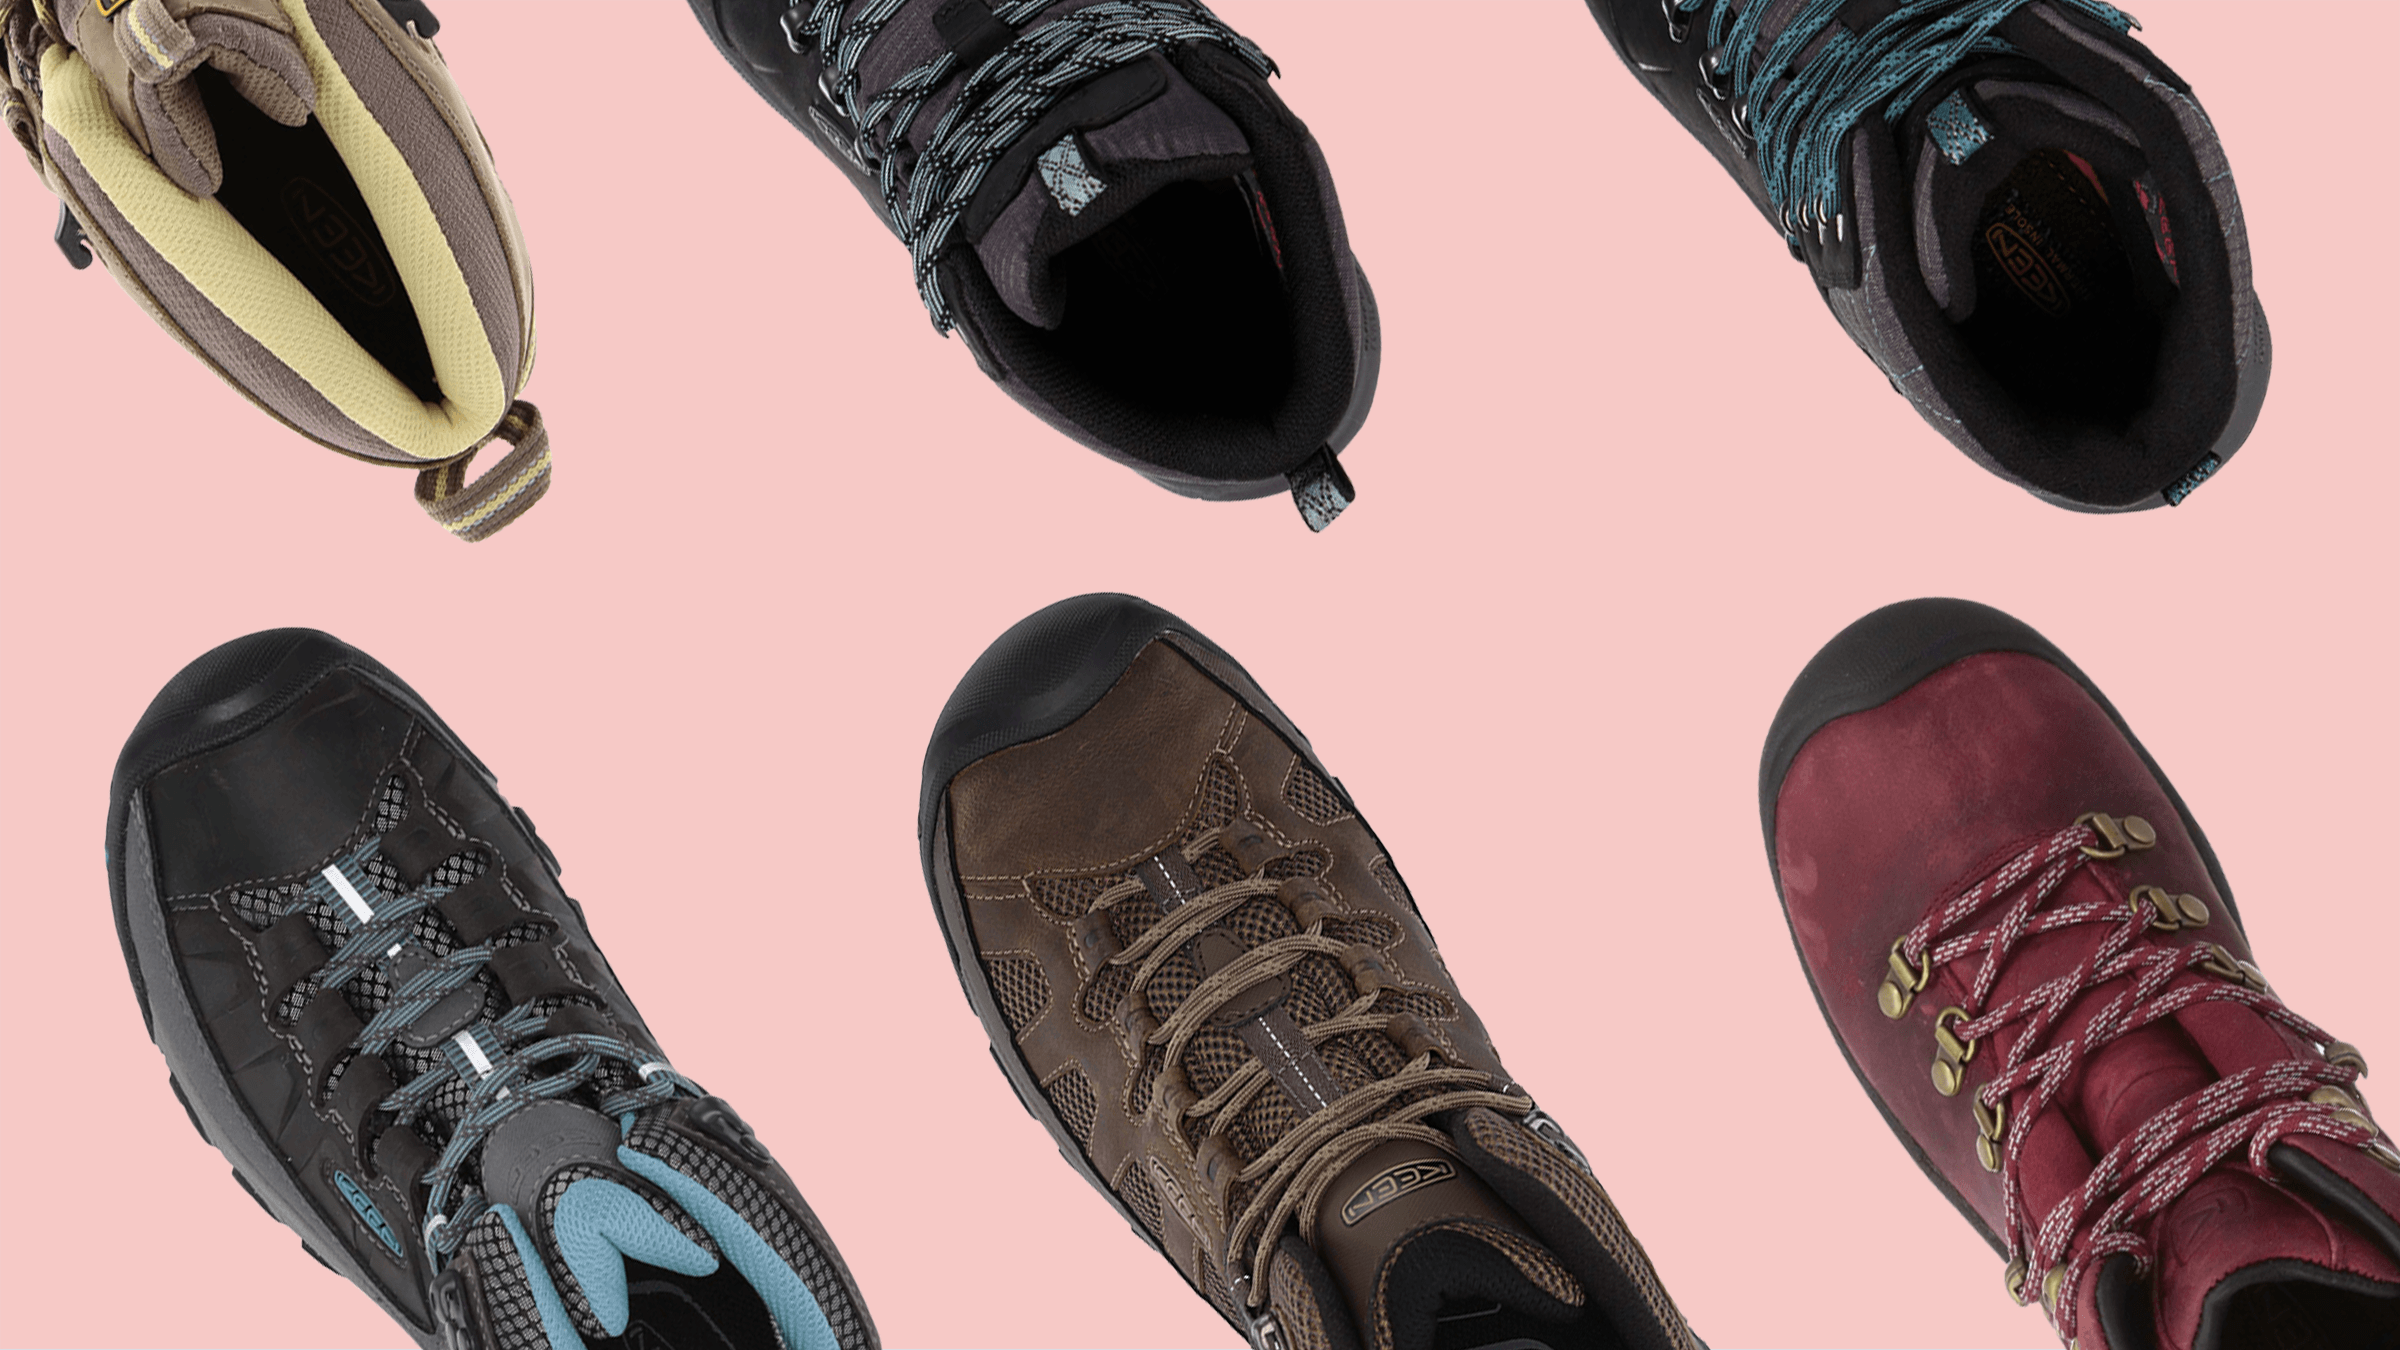 6 Best Keen Hiking Boots For Women in 2022